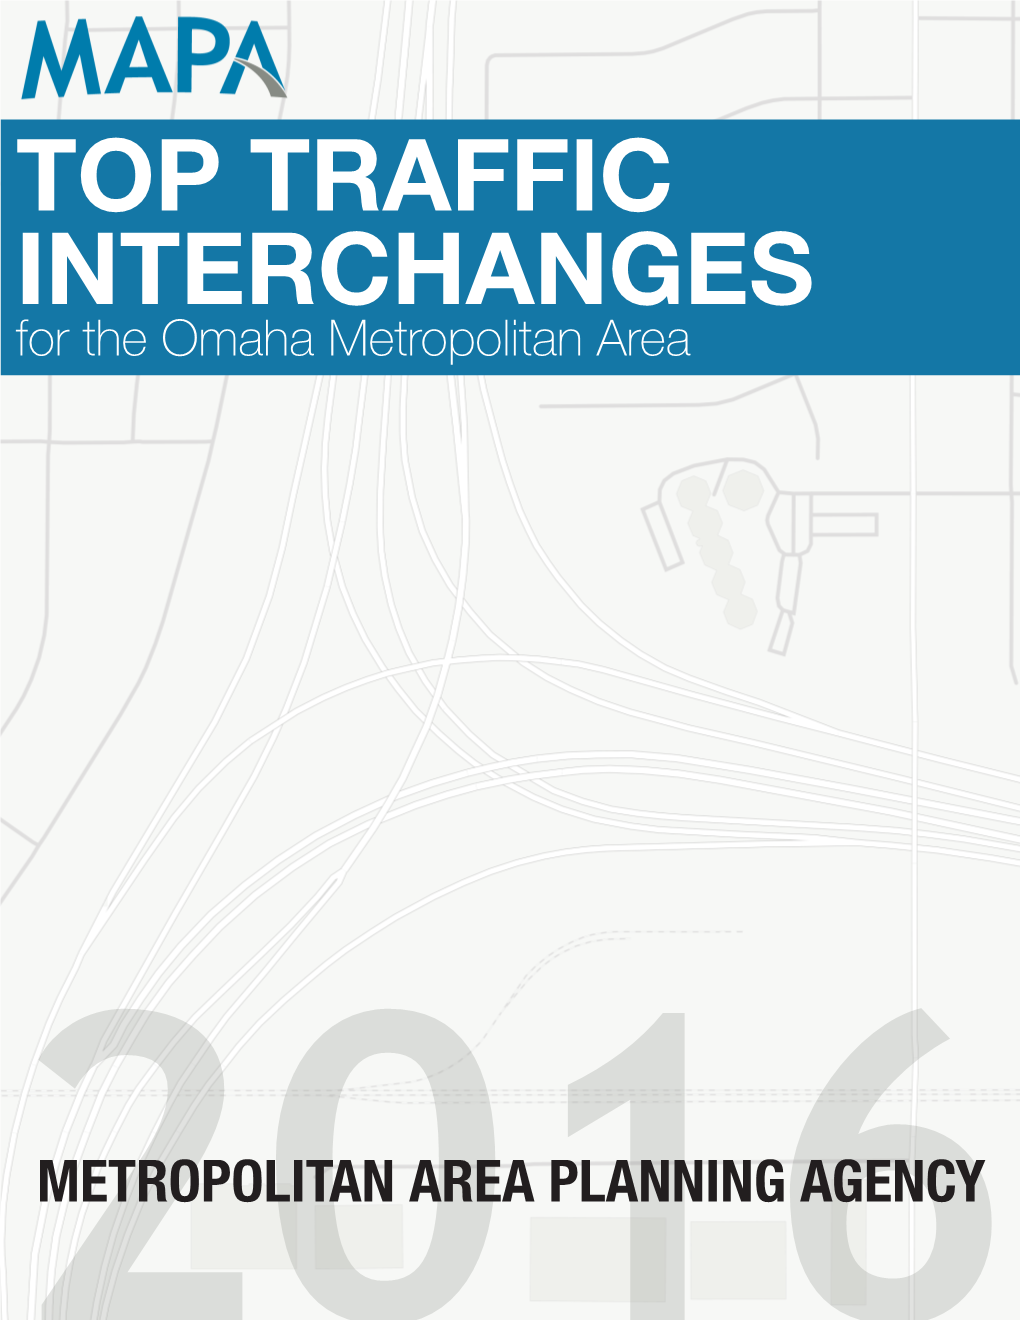 Top Traffic Interchanges in the Omaha Metro Area for 2016